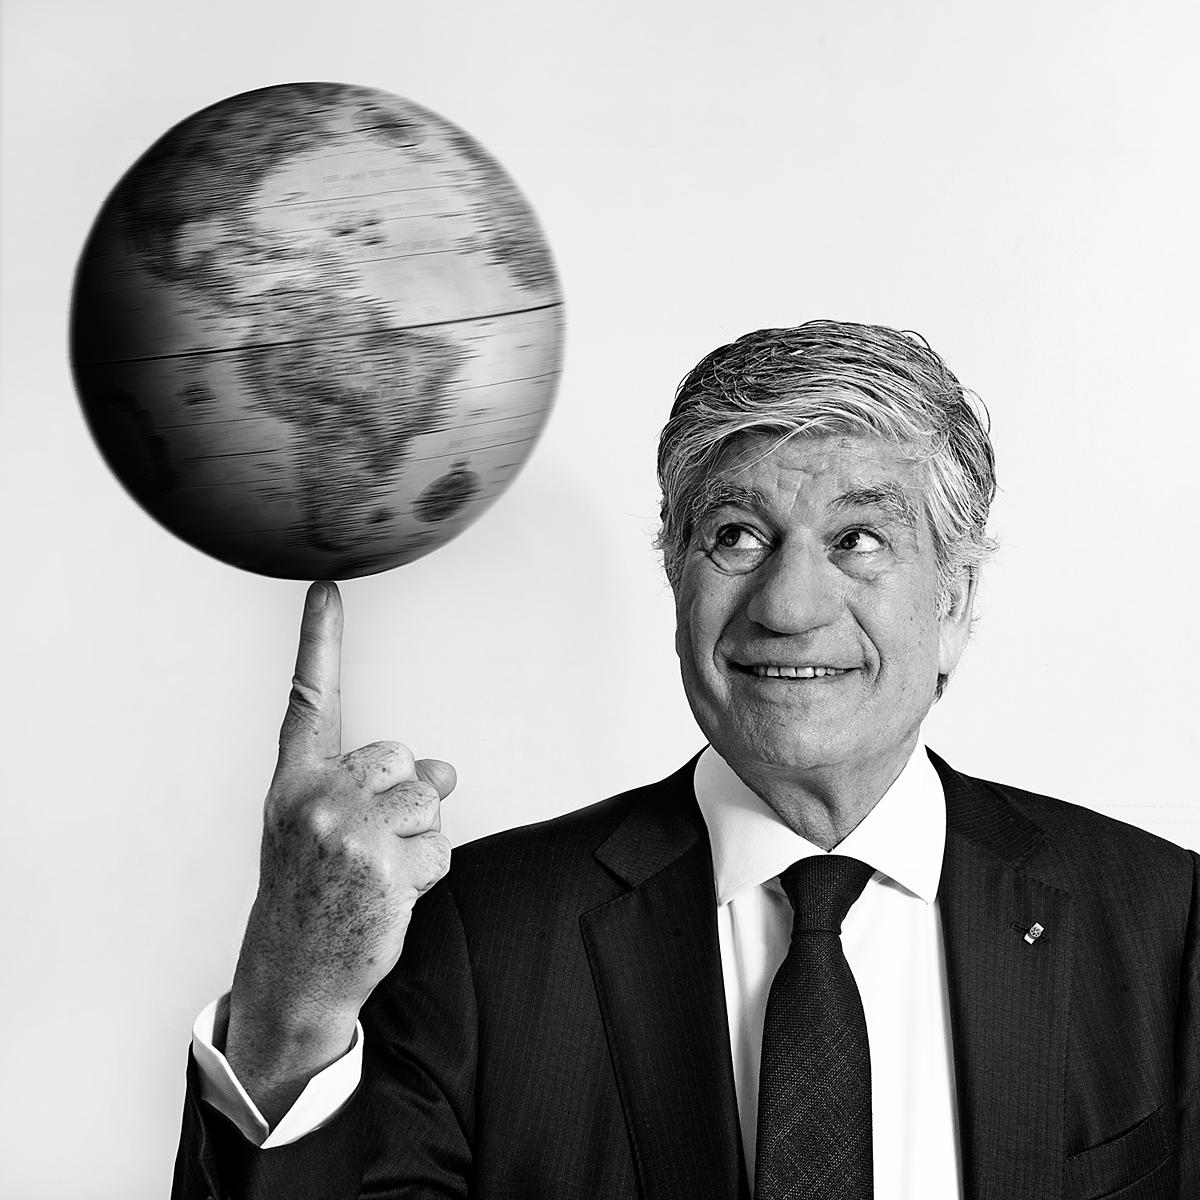 Photograph of Maurice Levy, CEO of Publicis Group for The Drum by Julian Hanford